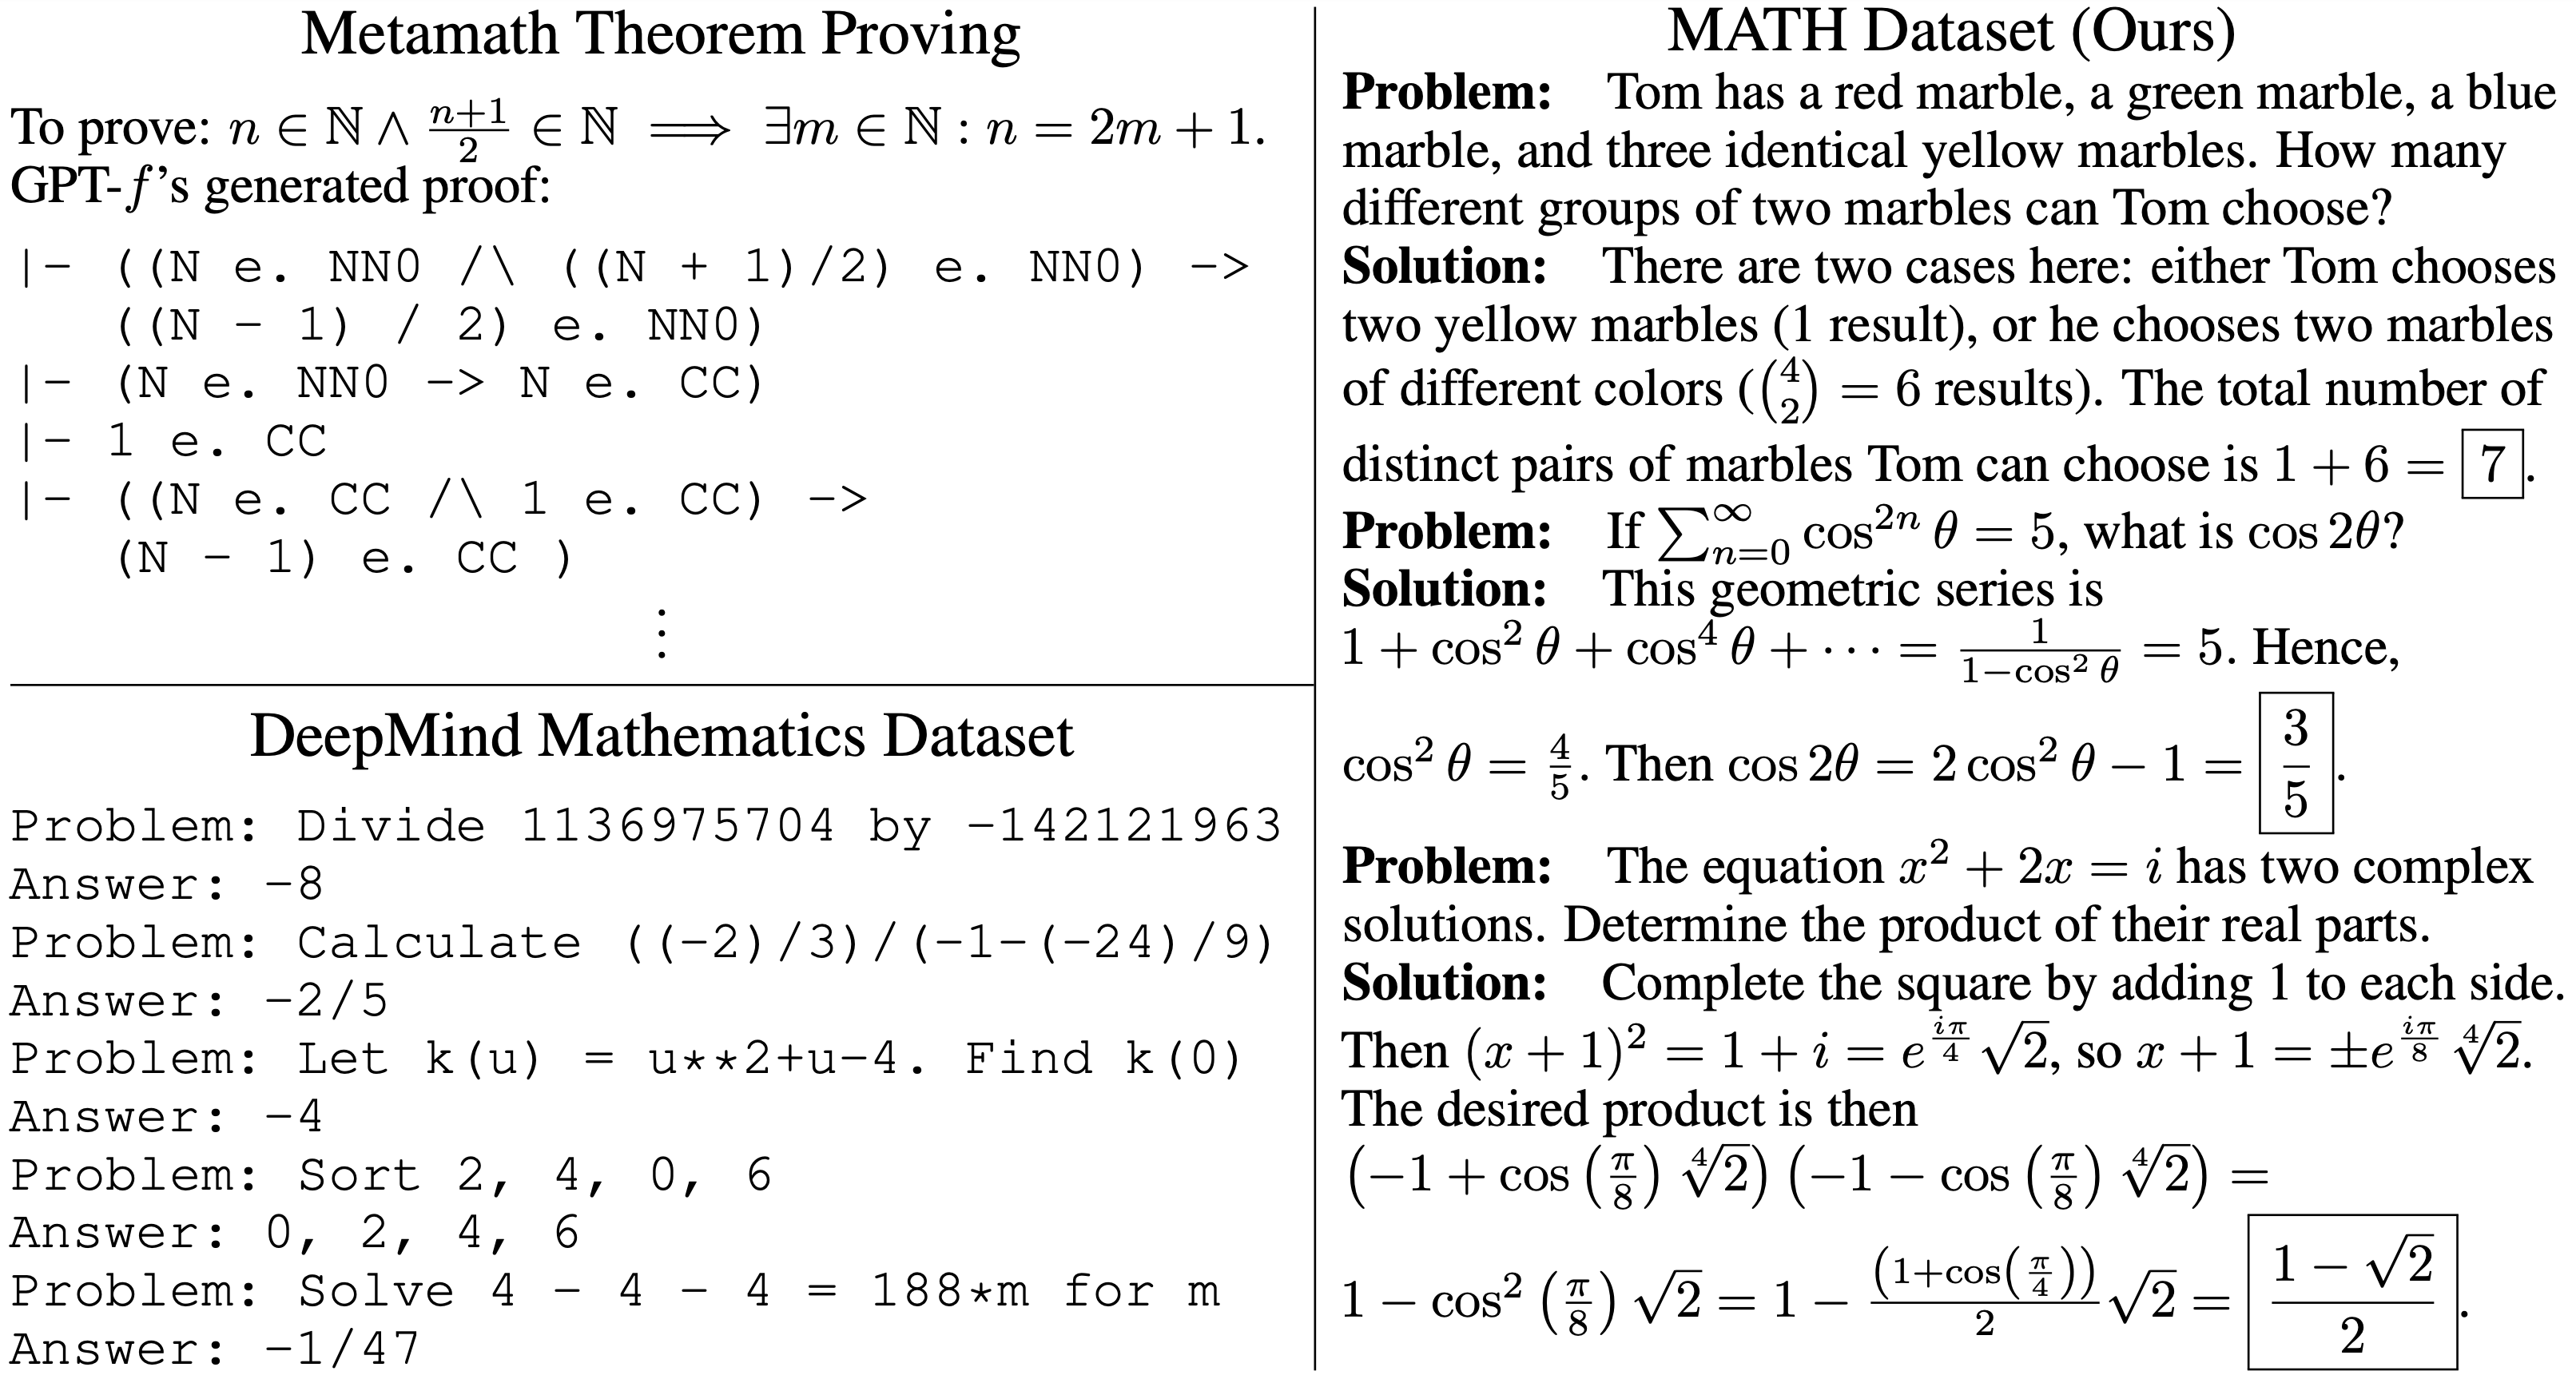 measuring mathematical problem solving with the math dataset